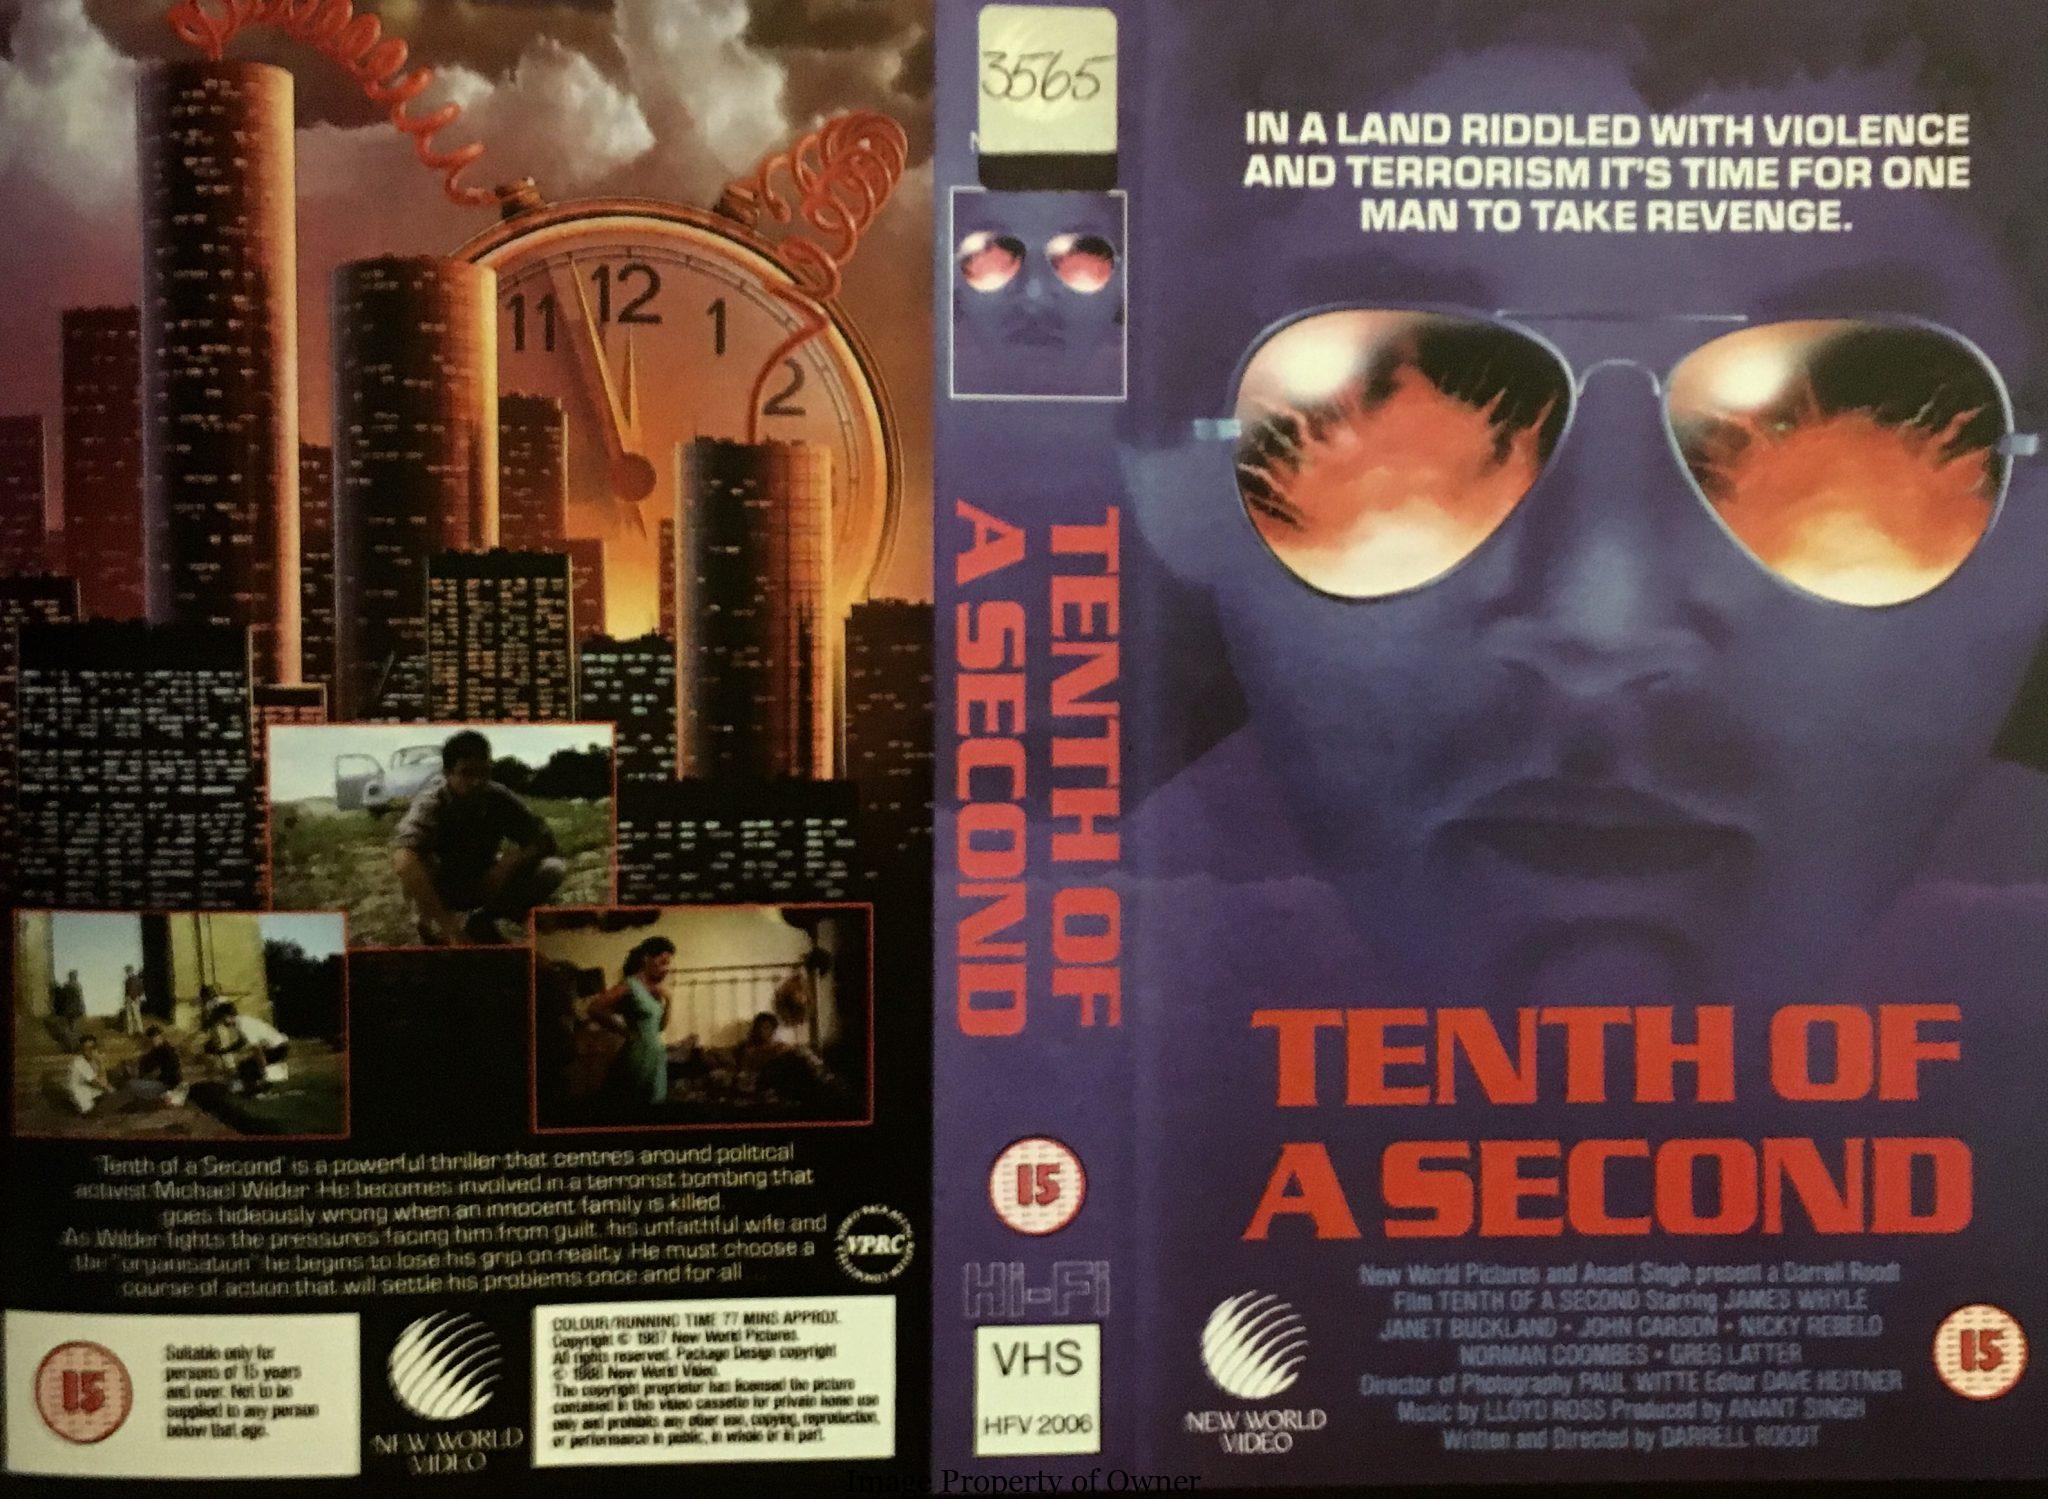 VHS Video Cover Art by Thomas Hodge